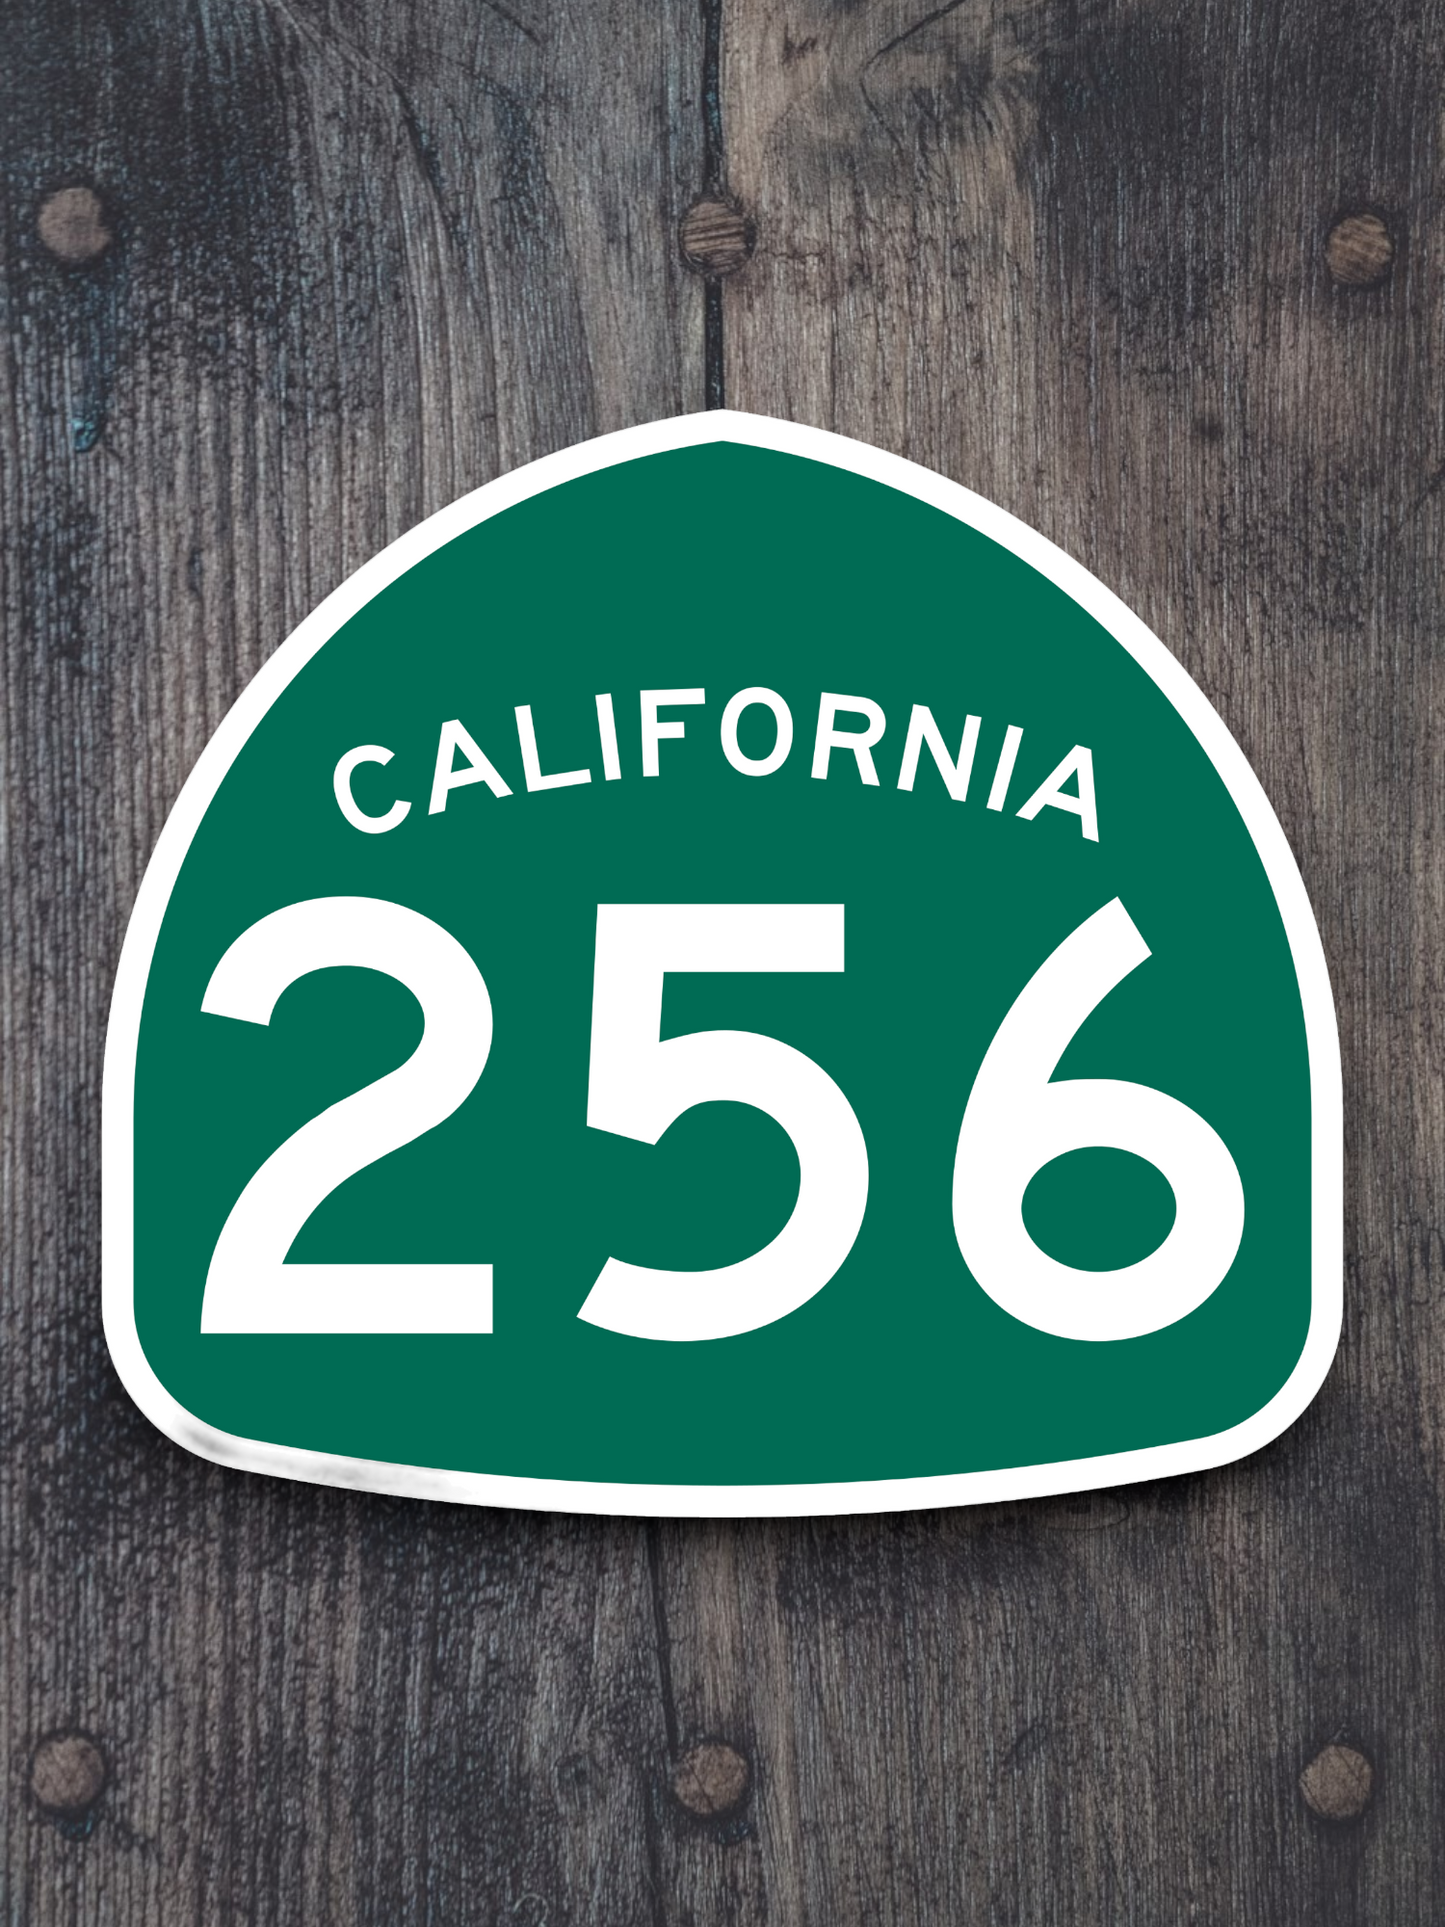 California State Route 256 Road Sign Sticker